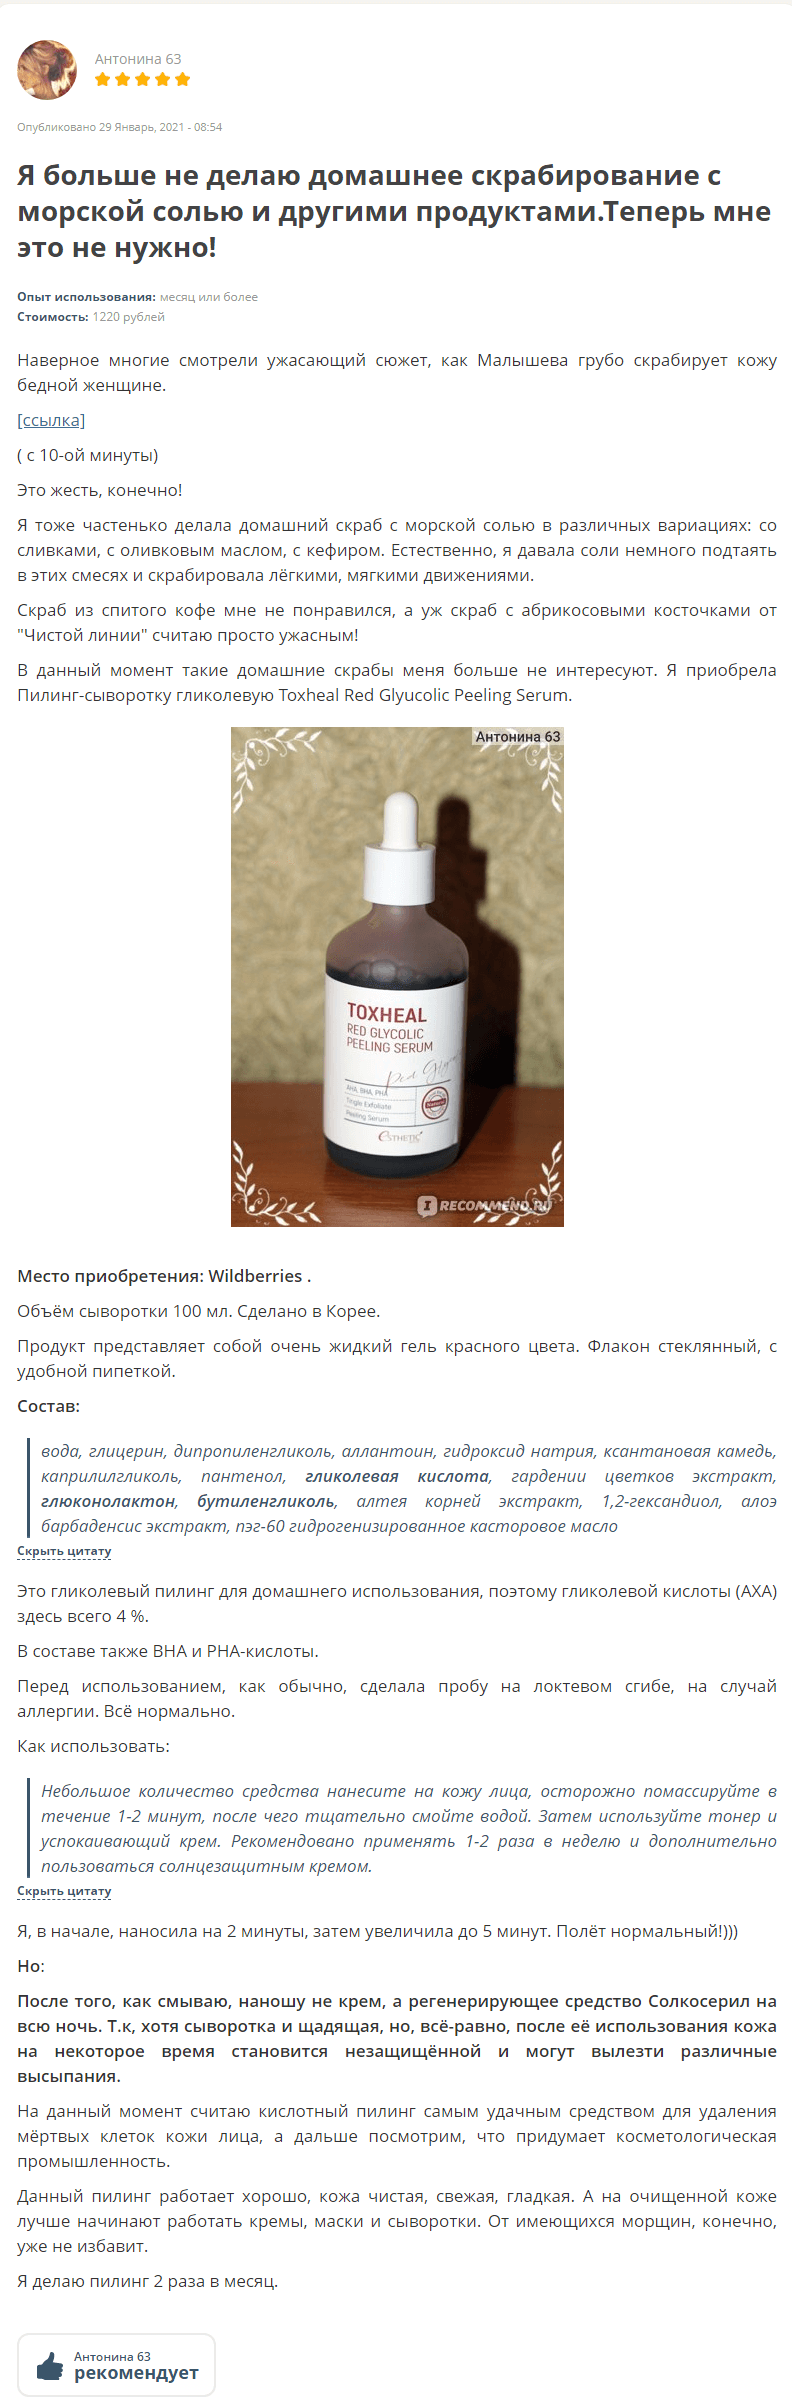 toxheal_red_glycolic_pellig_serum_esthetic_house_3